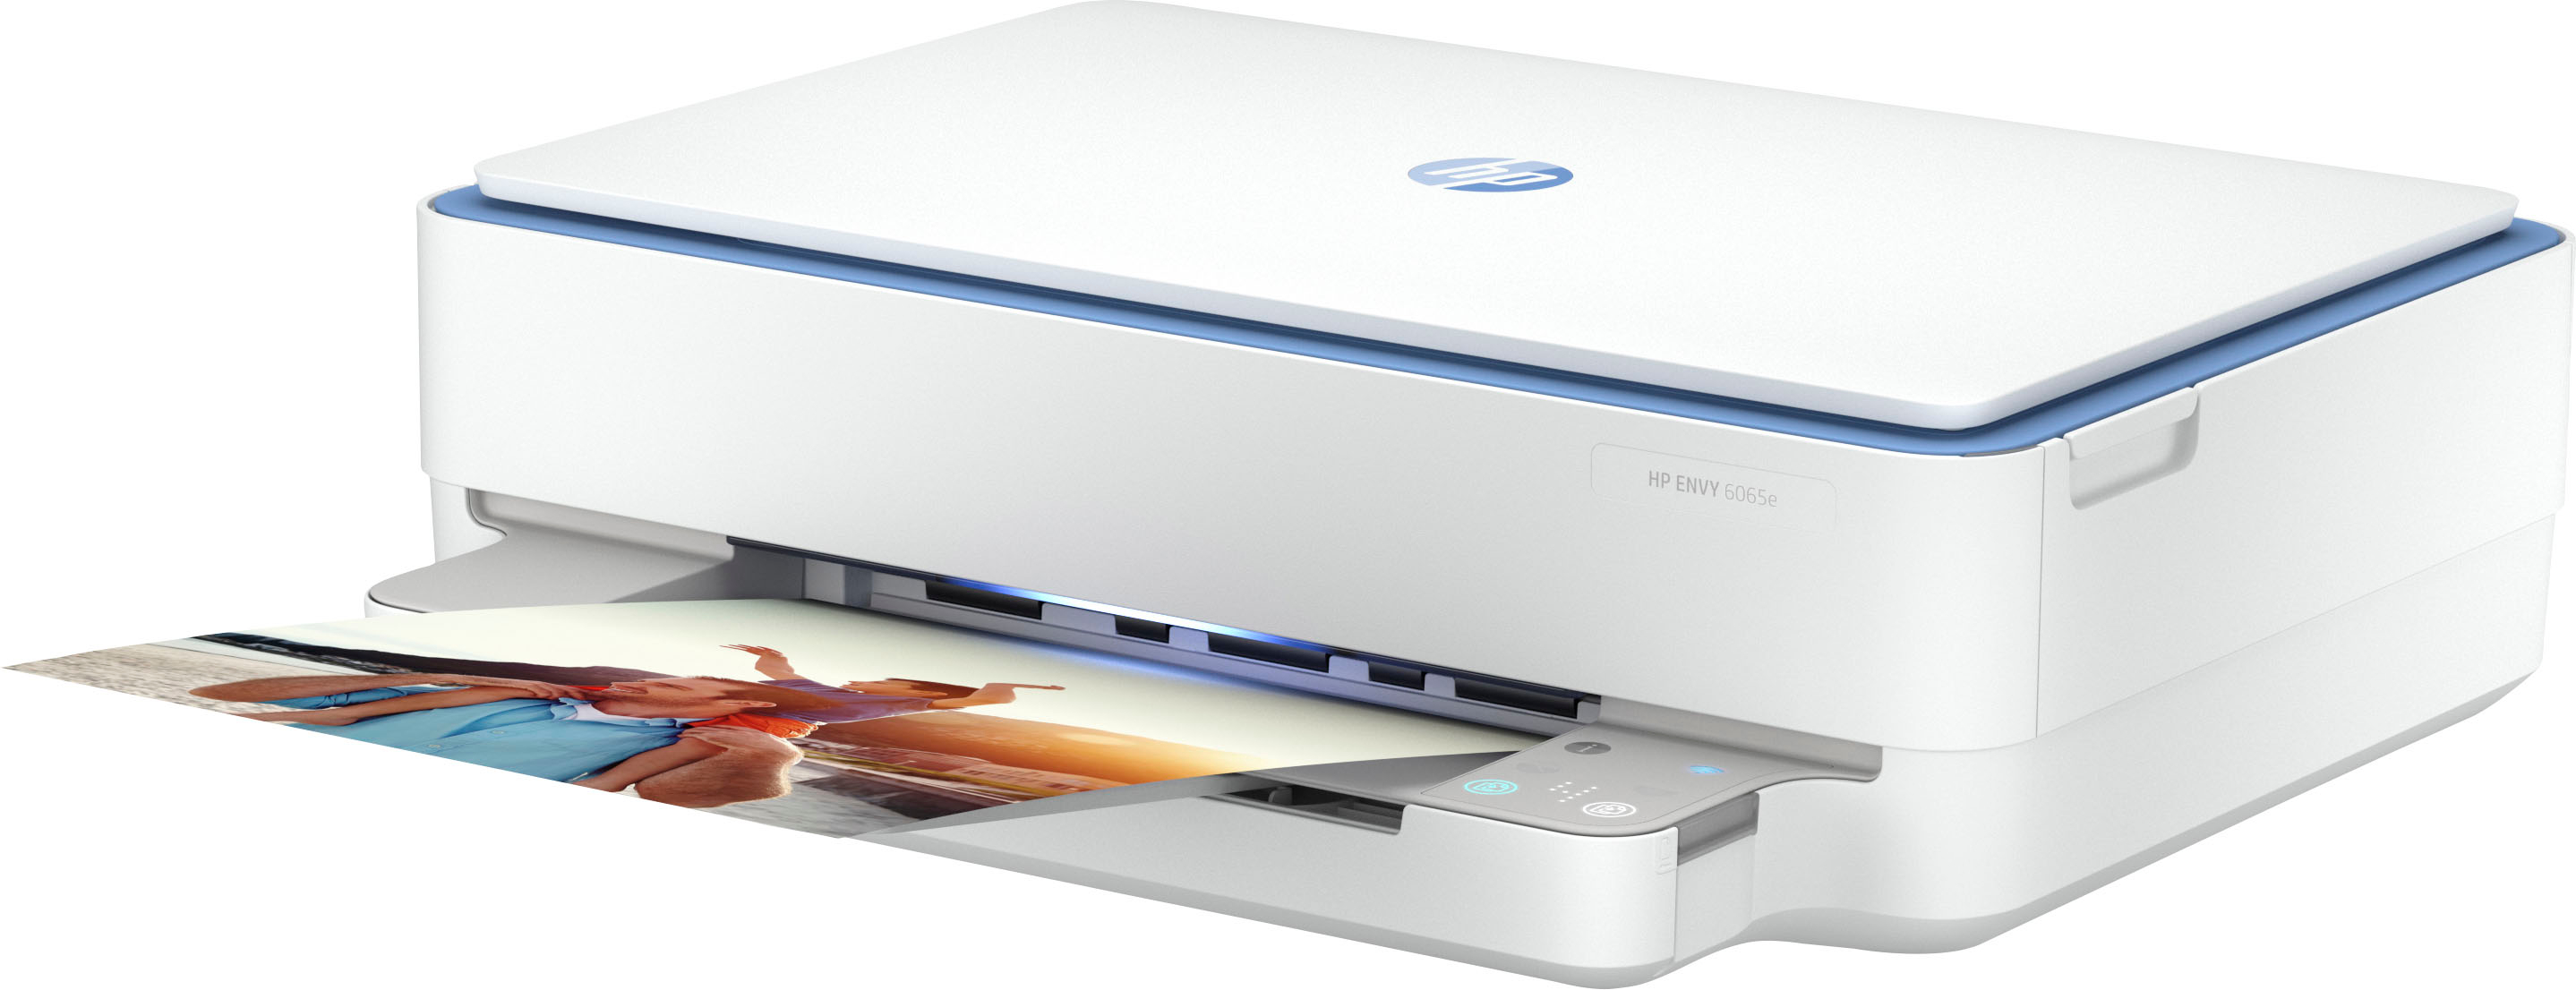 Angle View: HP - ENVY 6065e Wireless All-in-One Inkjet Printer with 3 months of Instant Ink included with HP+